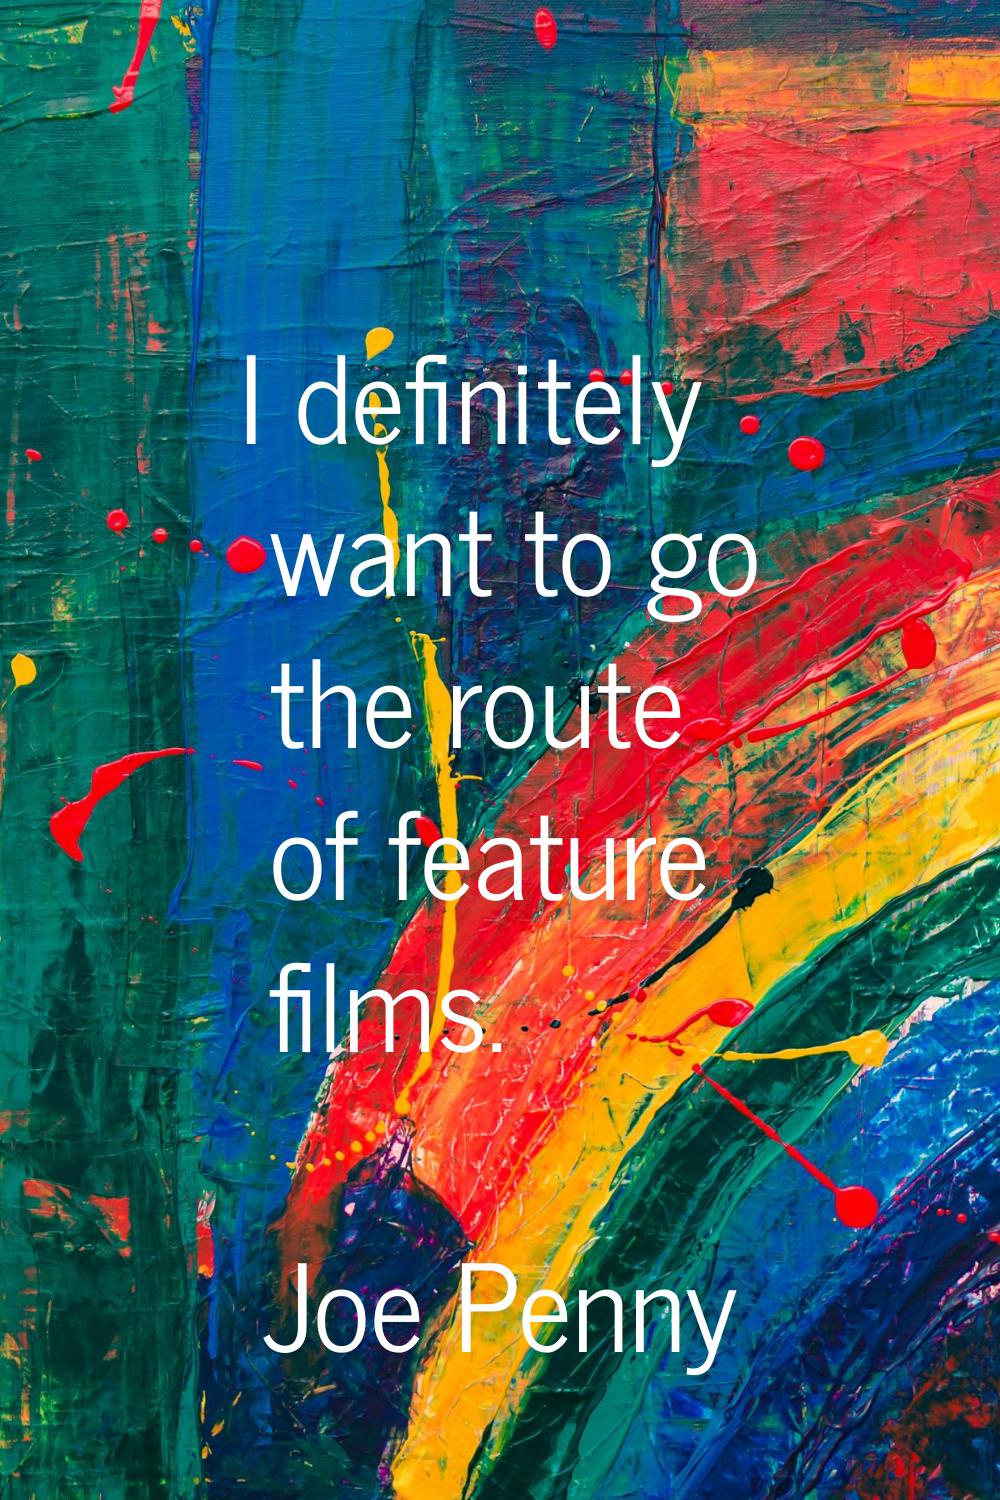 I definitely want to go the route of feature films.